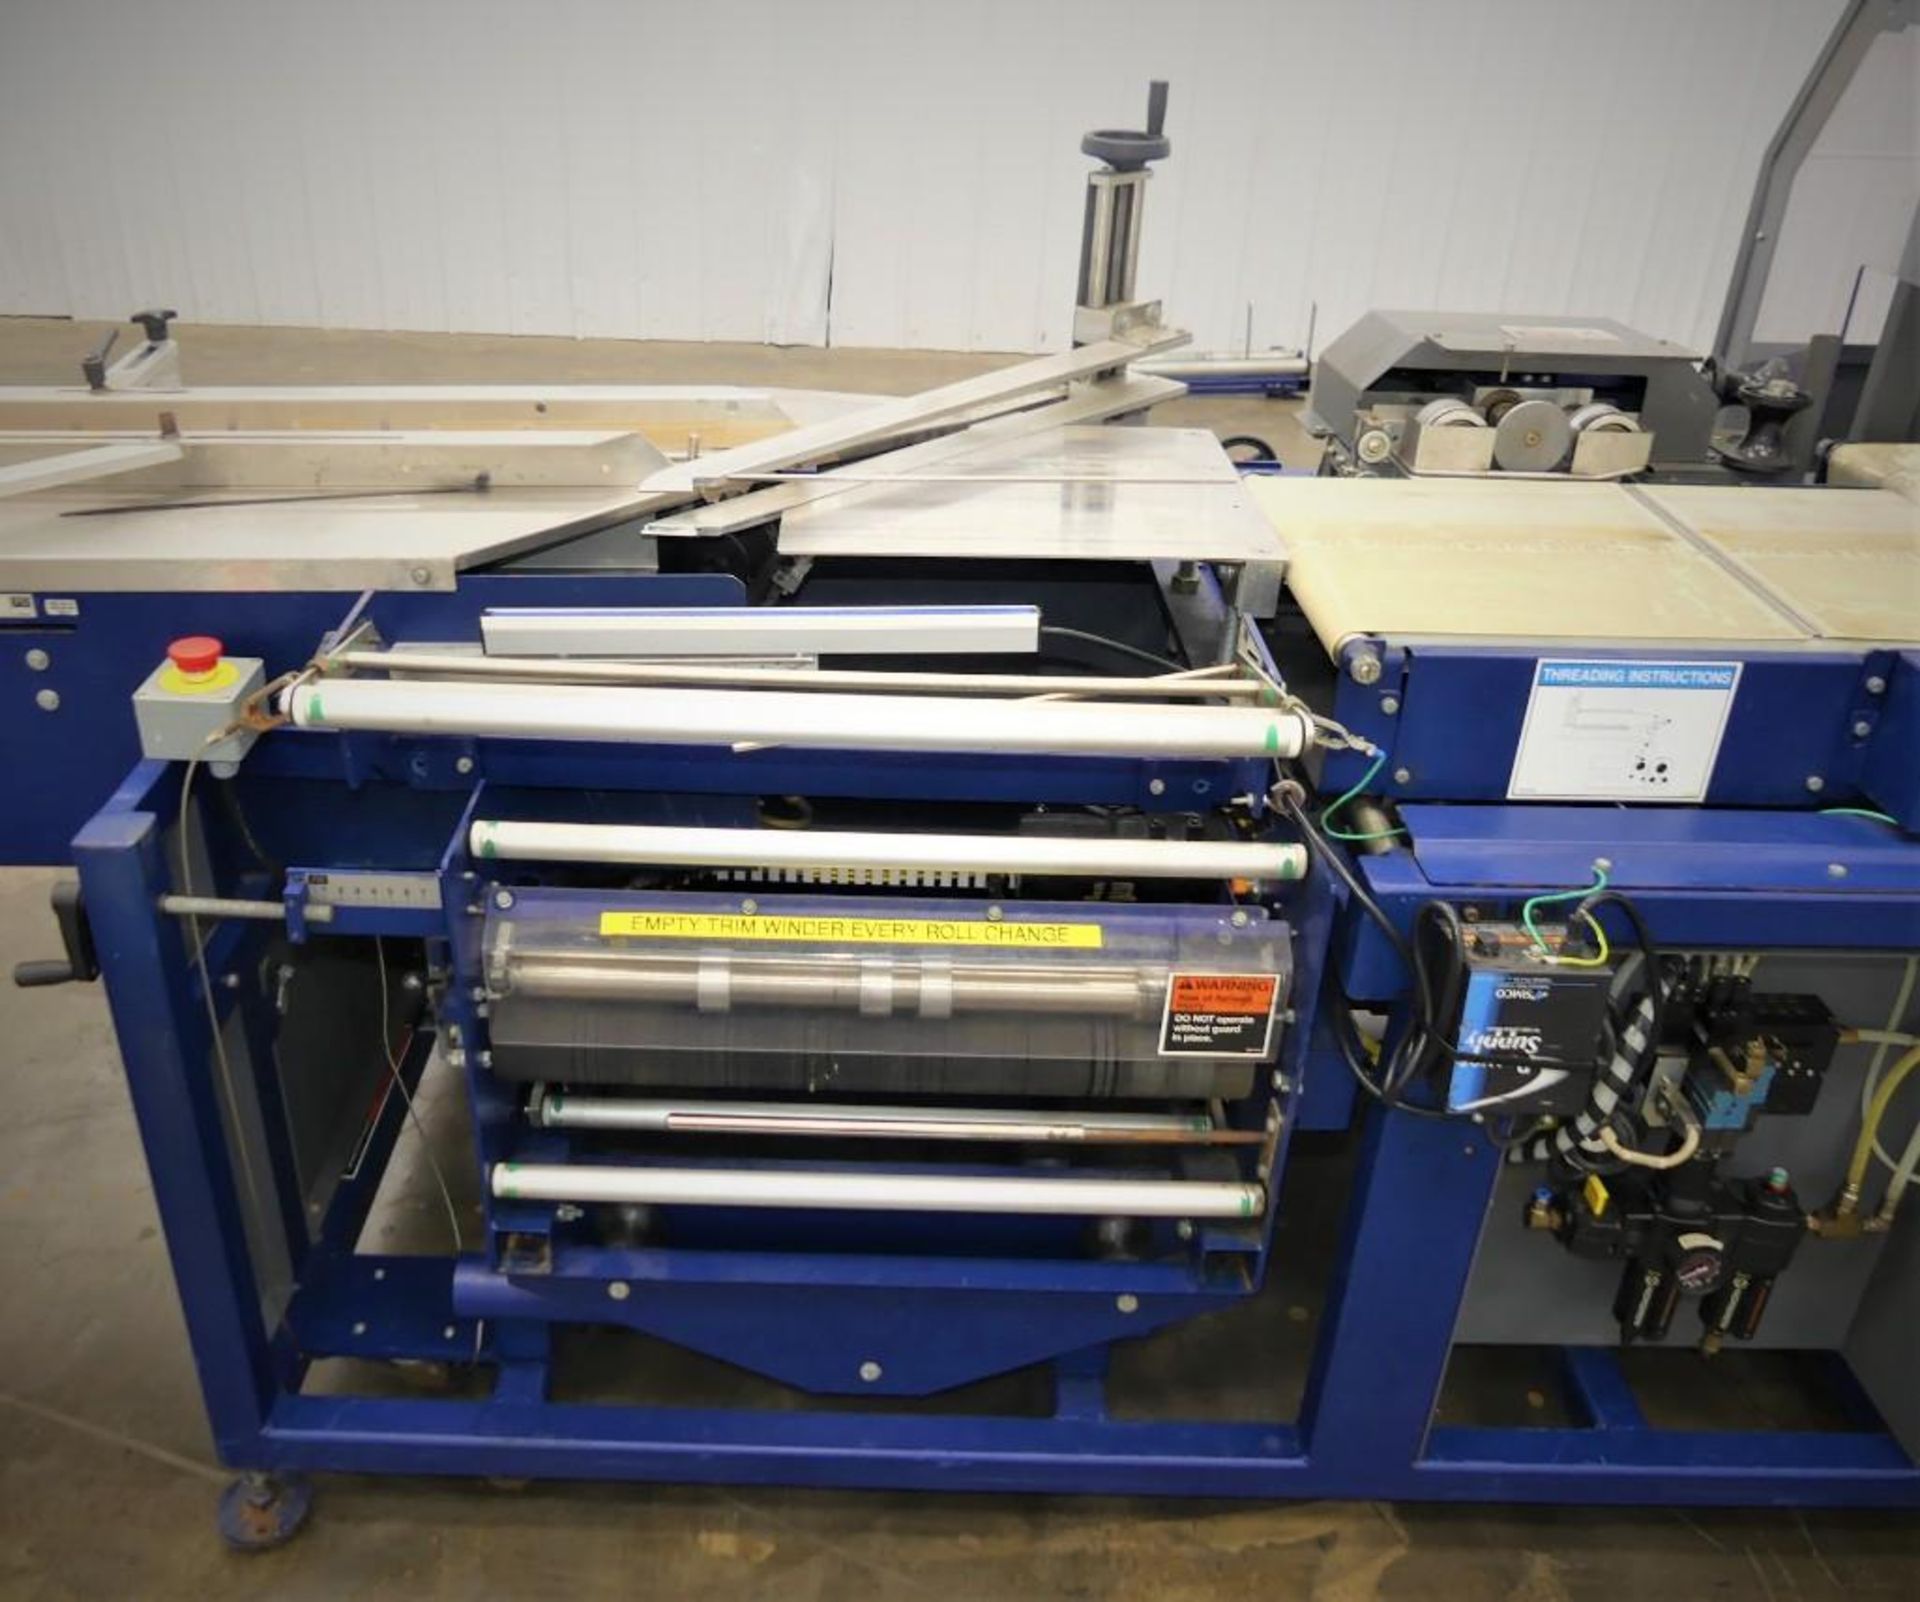 Lantech 200 Side Sealer Includes all parts, electronic components, manuals, etc - Image 8 of 17